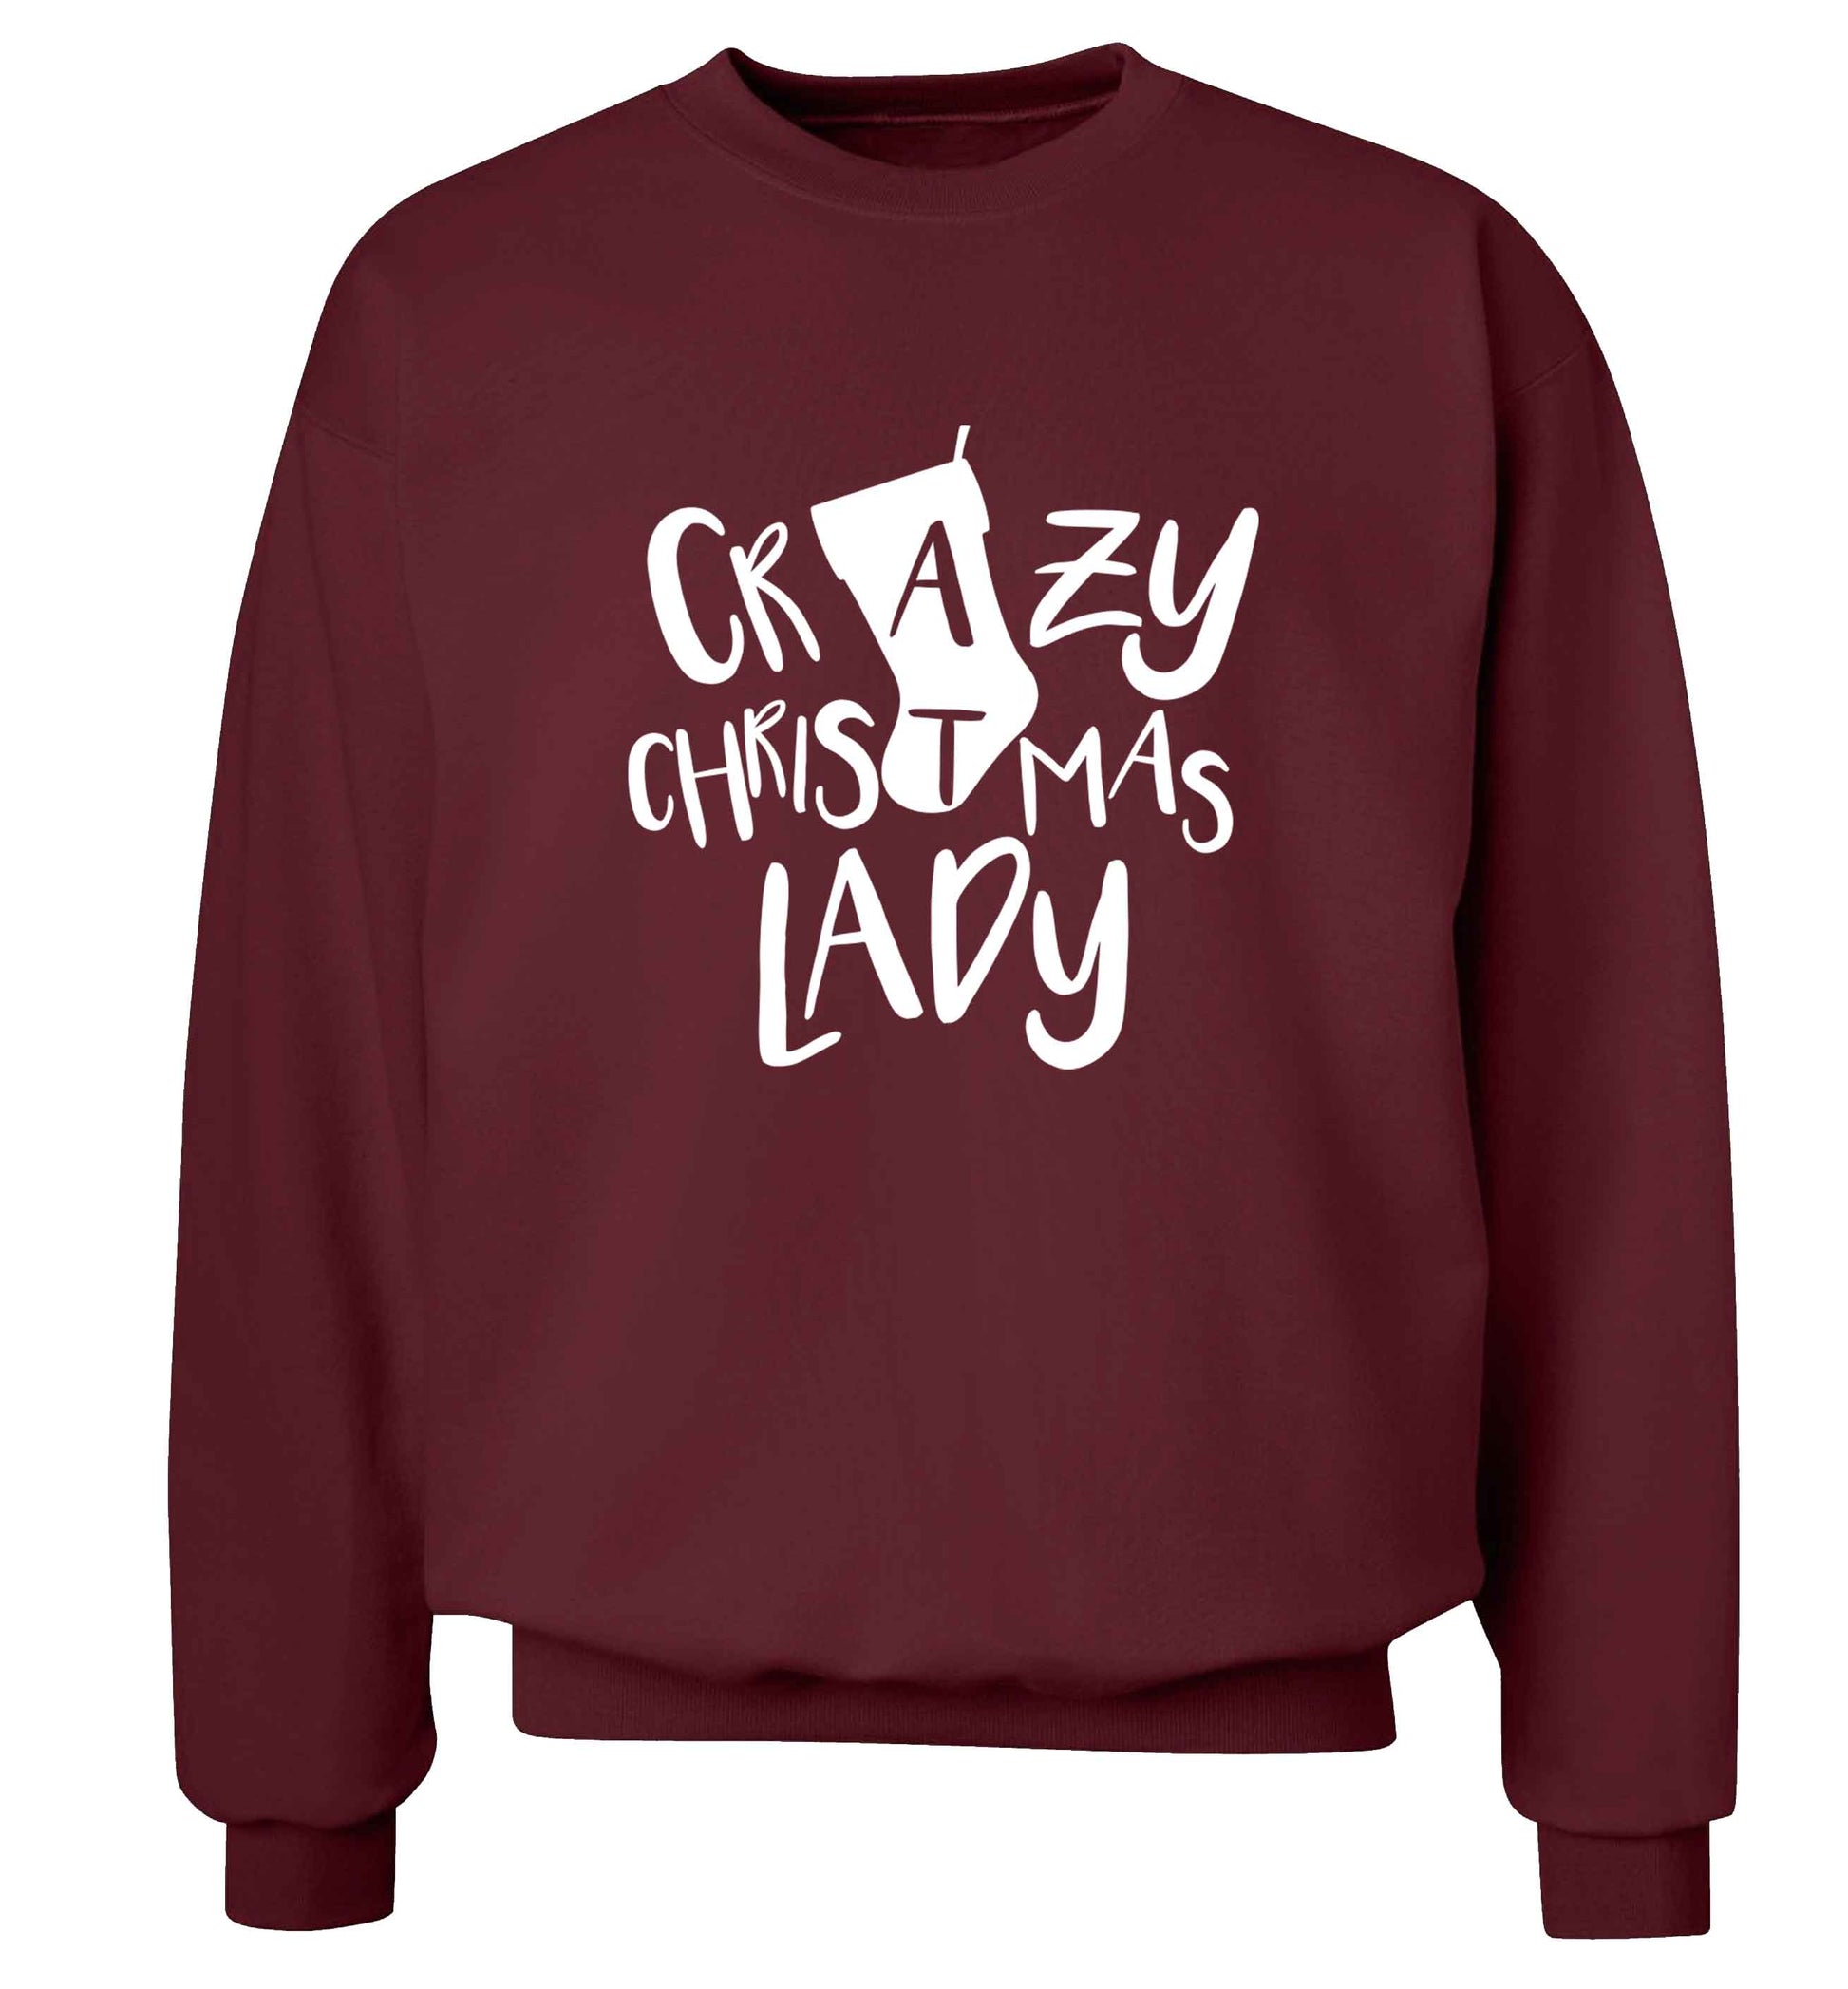 Crazy Christmas Dude adult's unisex maroon sweater 2XL